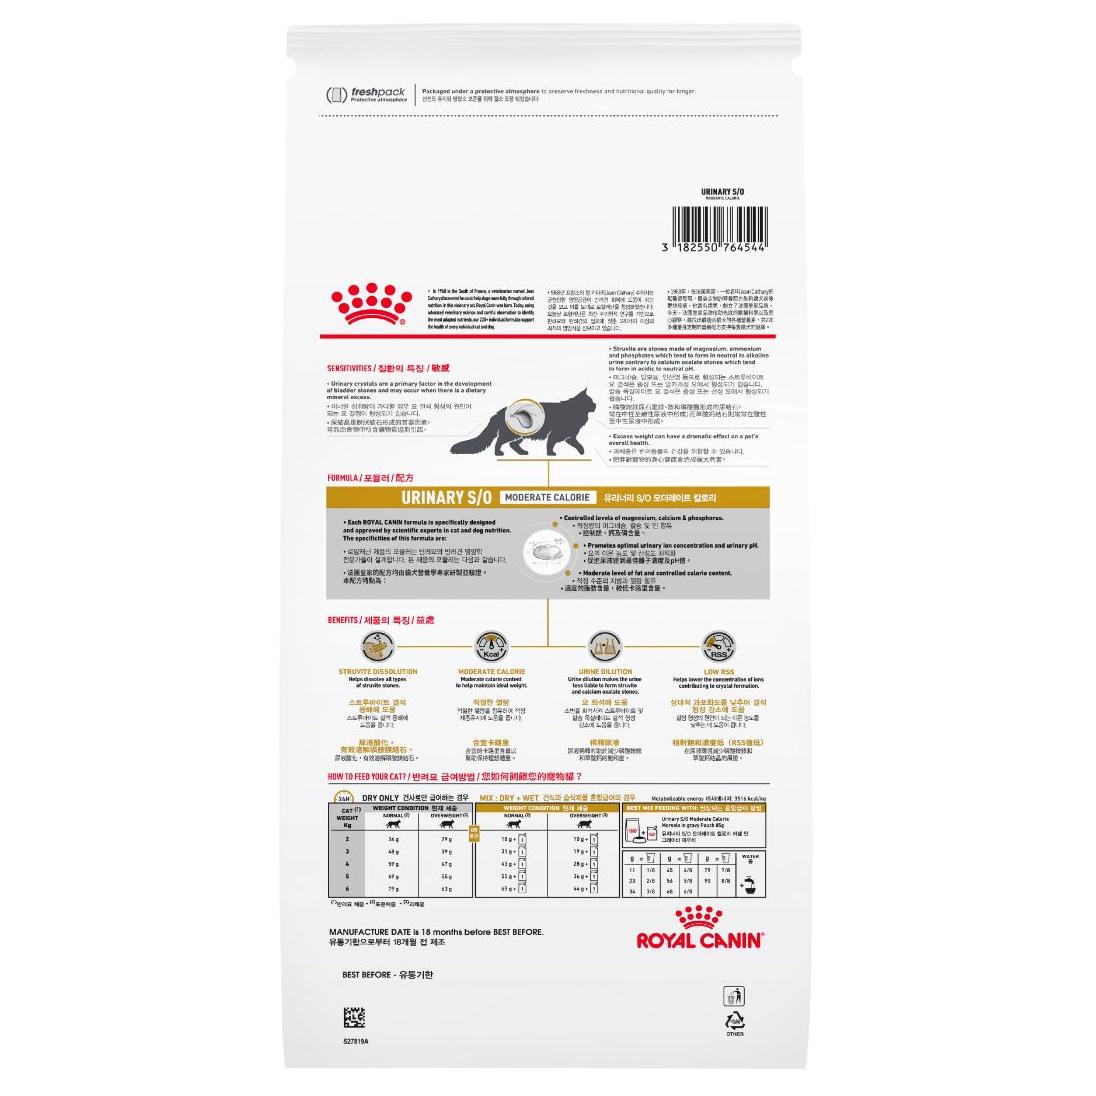 Royal Canin Veterinary Diet Urinary S/O Moderate Calorie Dry Cat Food